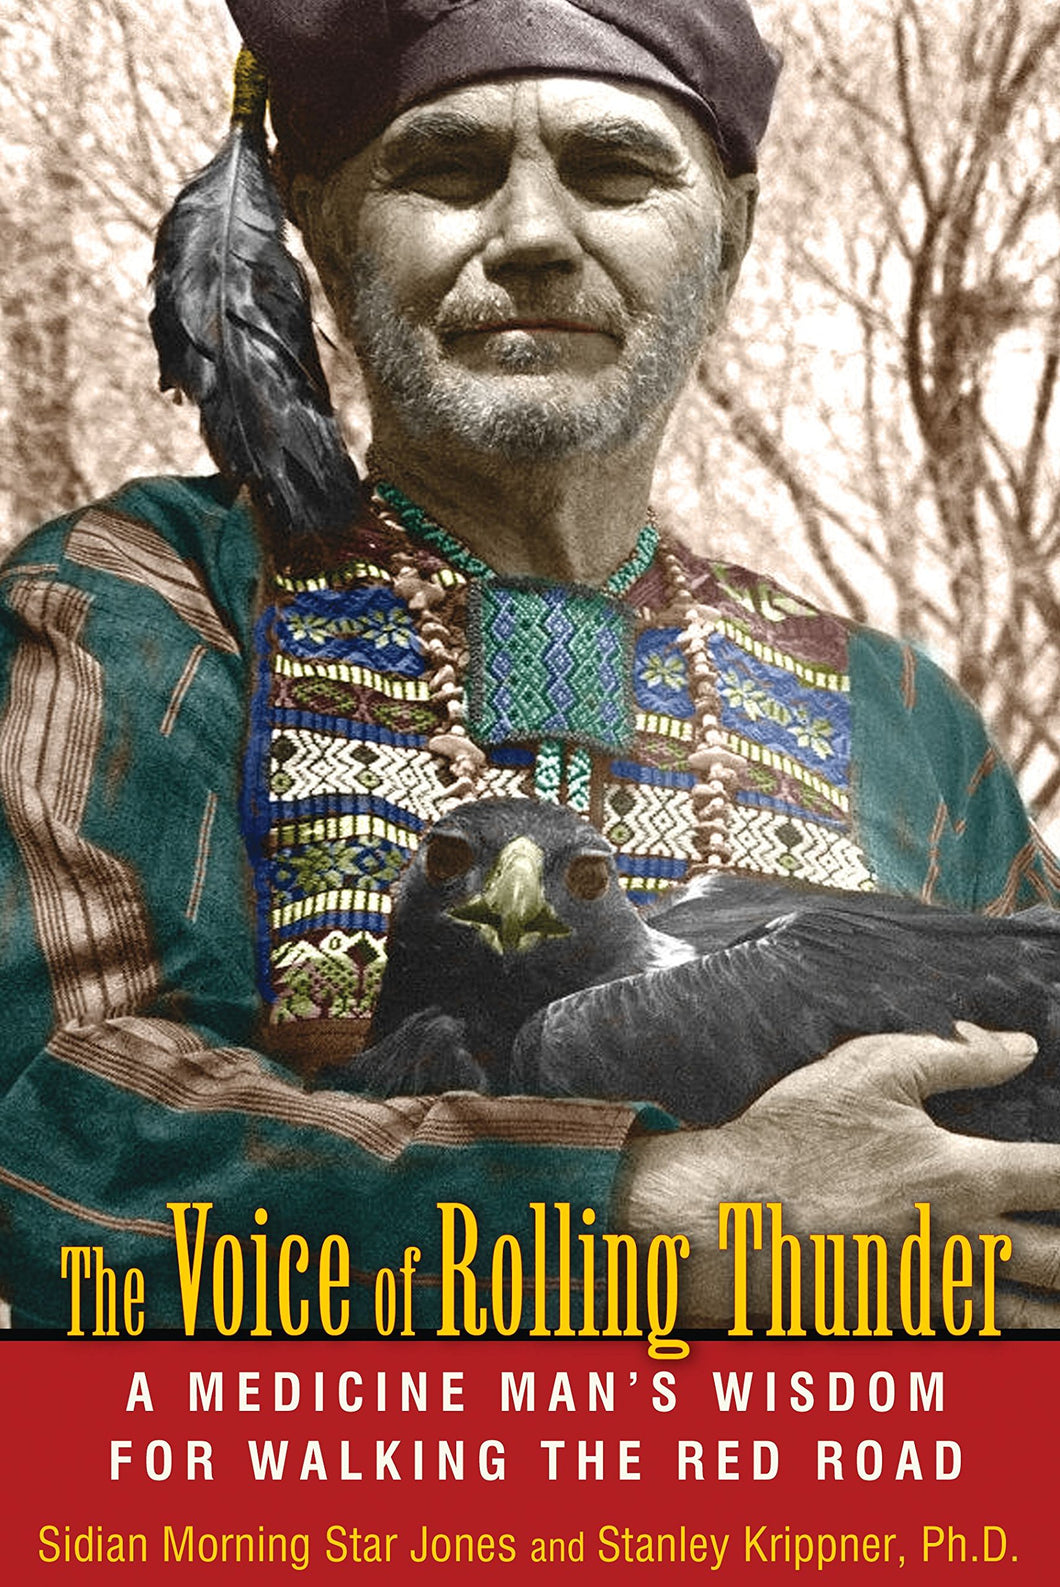 The Voice of Rolling Thunder: A Medicine Man's Wisdom for Walking the Red Road [Sidian Morning Star Jones & Stanley Krippner Ph.D]